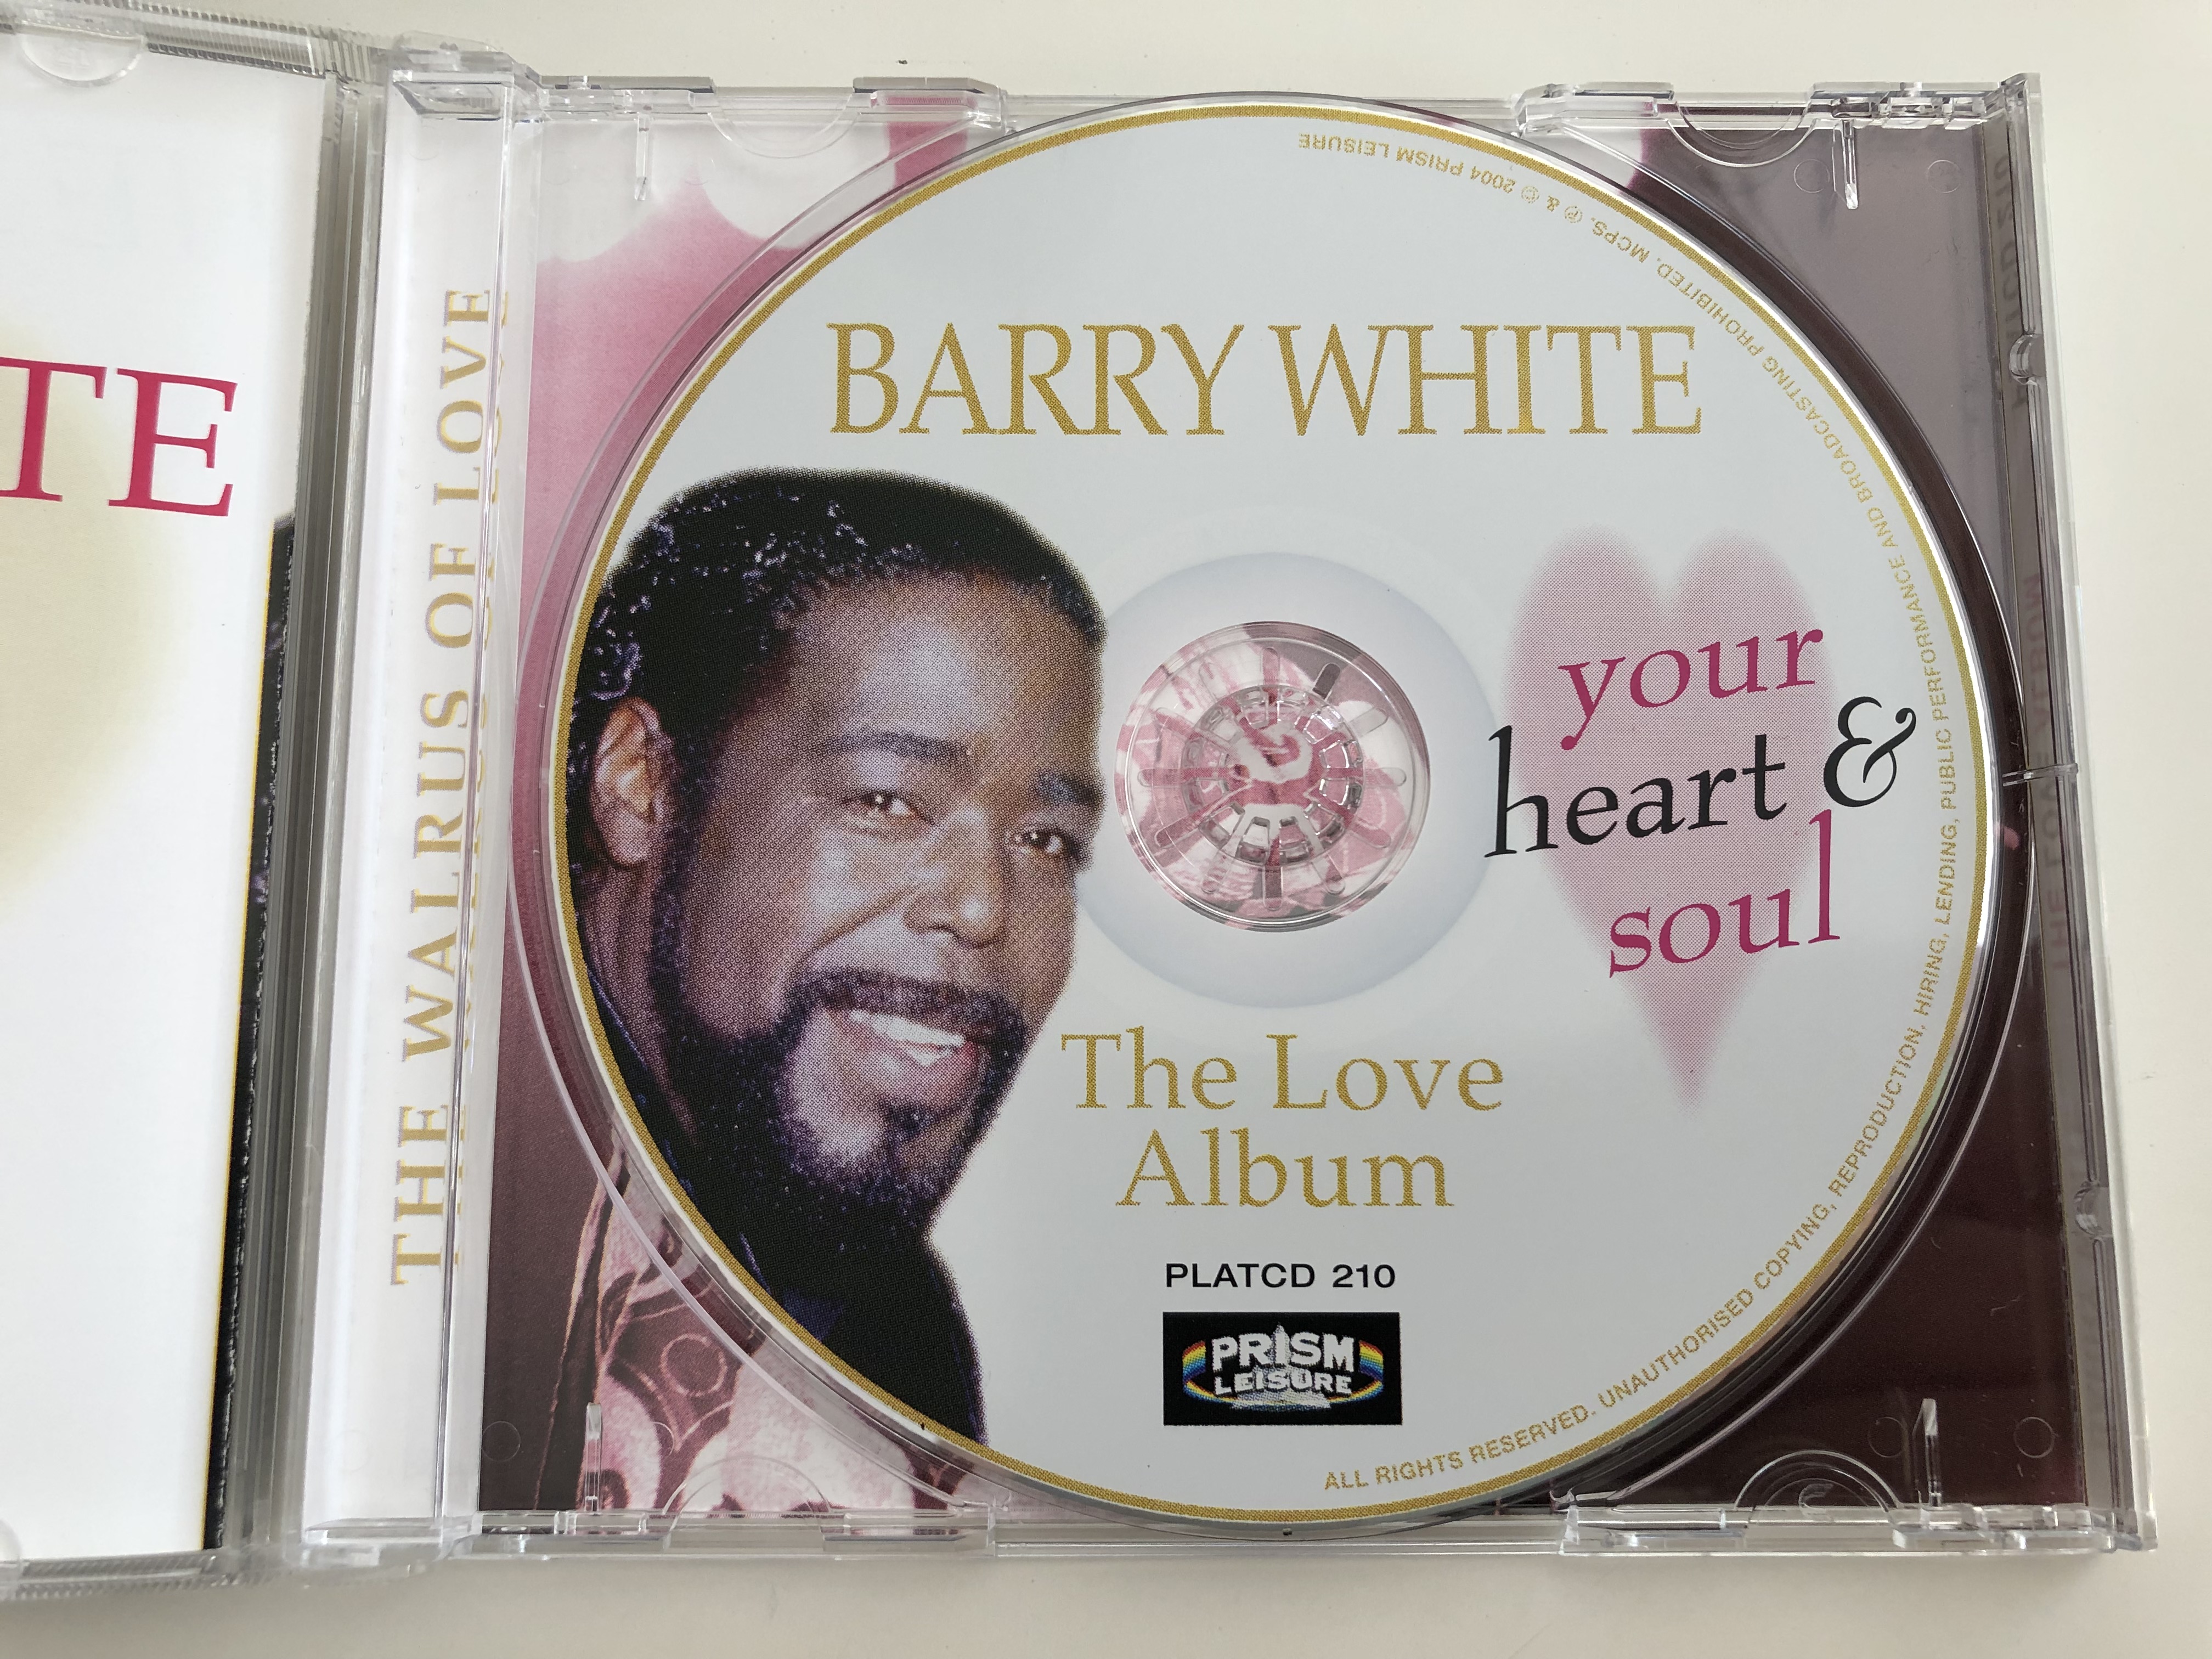 barry-white-your-heart-and-soul-the-love-album-audio-cd-1997-platcd-210-prism-leisure-3-.jpg